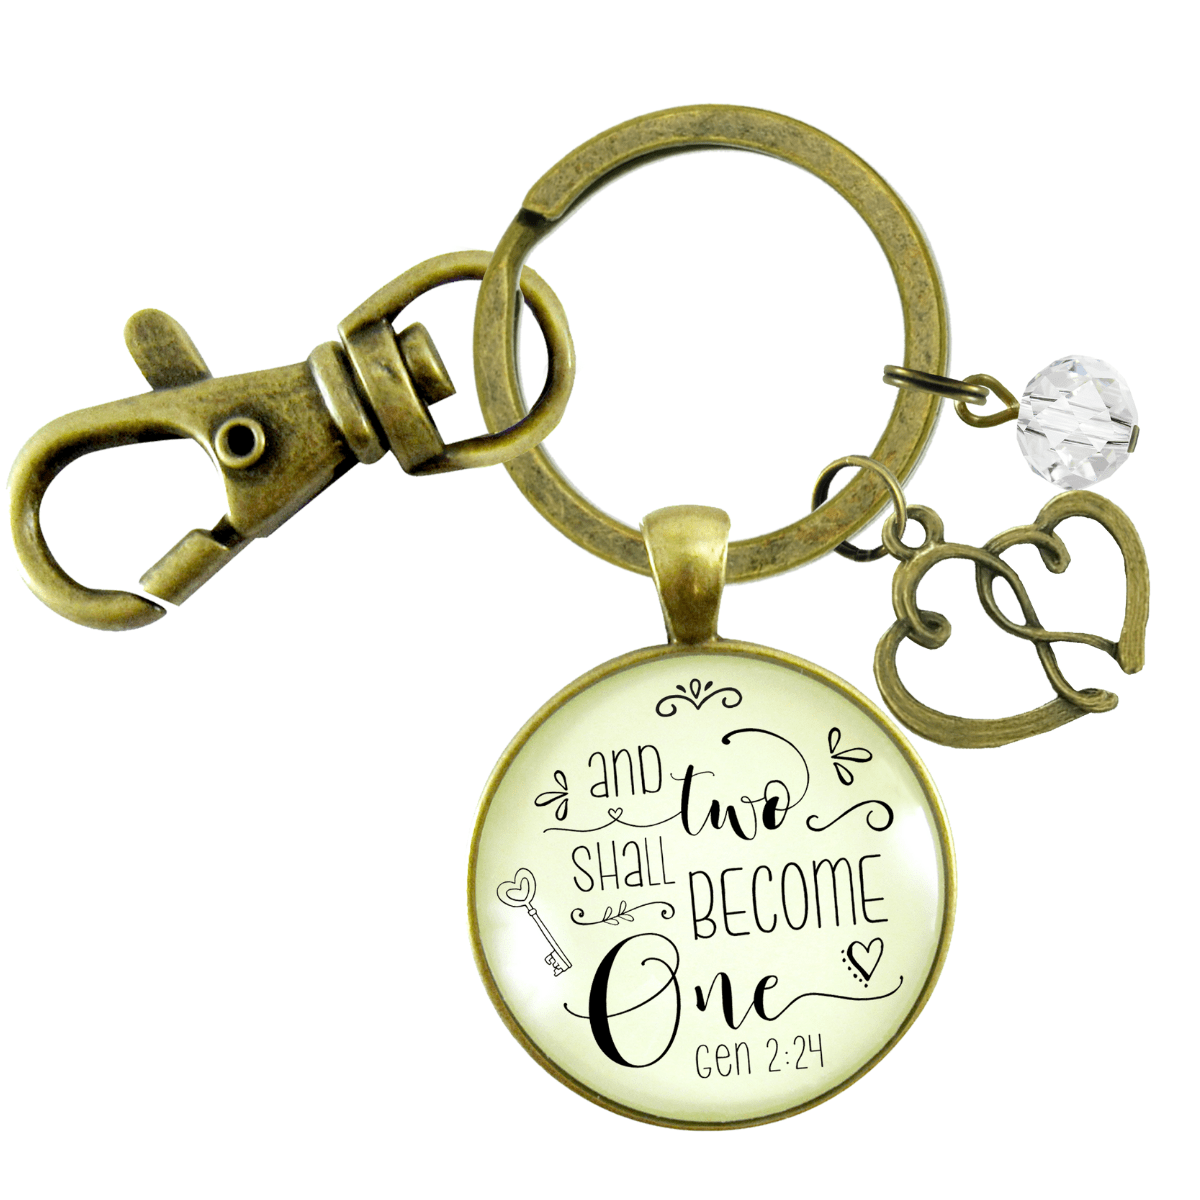 Christian Couples Jewelry Two Shall Become One Keychain Gift Romantic Charm - Gutsy Goodness Handmade Jewelry;Christian Couples Jewelry Two Shall Become One Keychain Gift Romantic Charm - Gutsy Goodness Handmade Jewelry Gifts